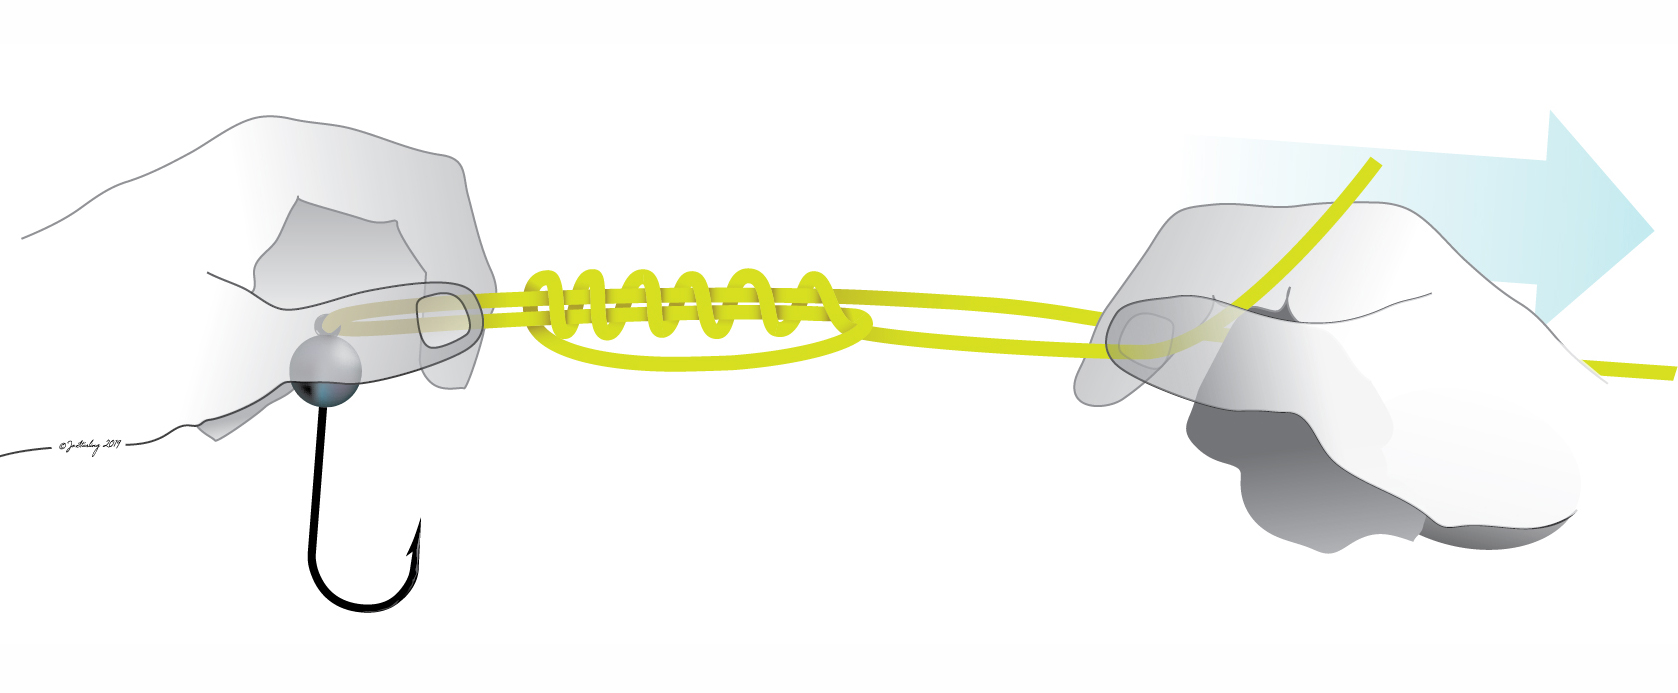 step three in how to tie a uni knot. Pull the tag away from the hook, fly or lure, while holding it still in the other hand. As the knot begins to close and tighten on itself, lubricate the wraps generously with saliva or water, then continue pulling it tight. © Fishotopia.com